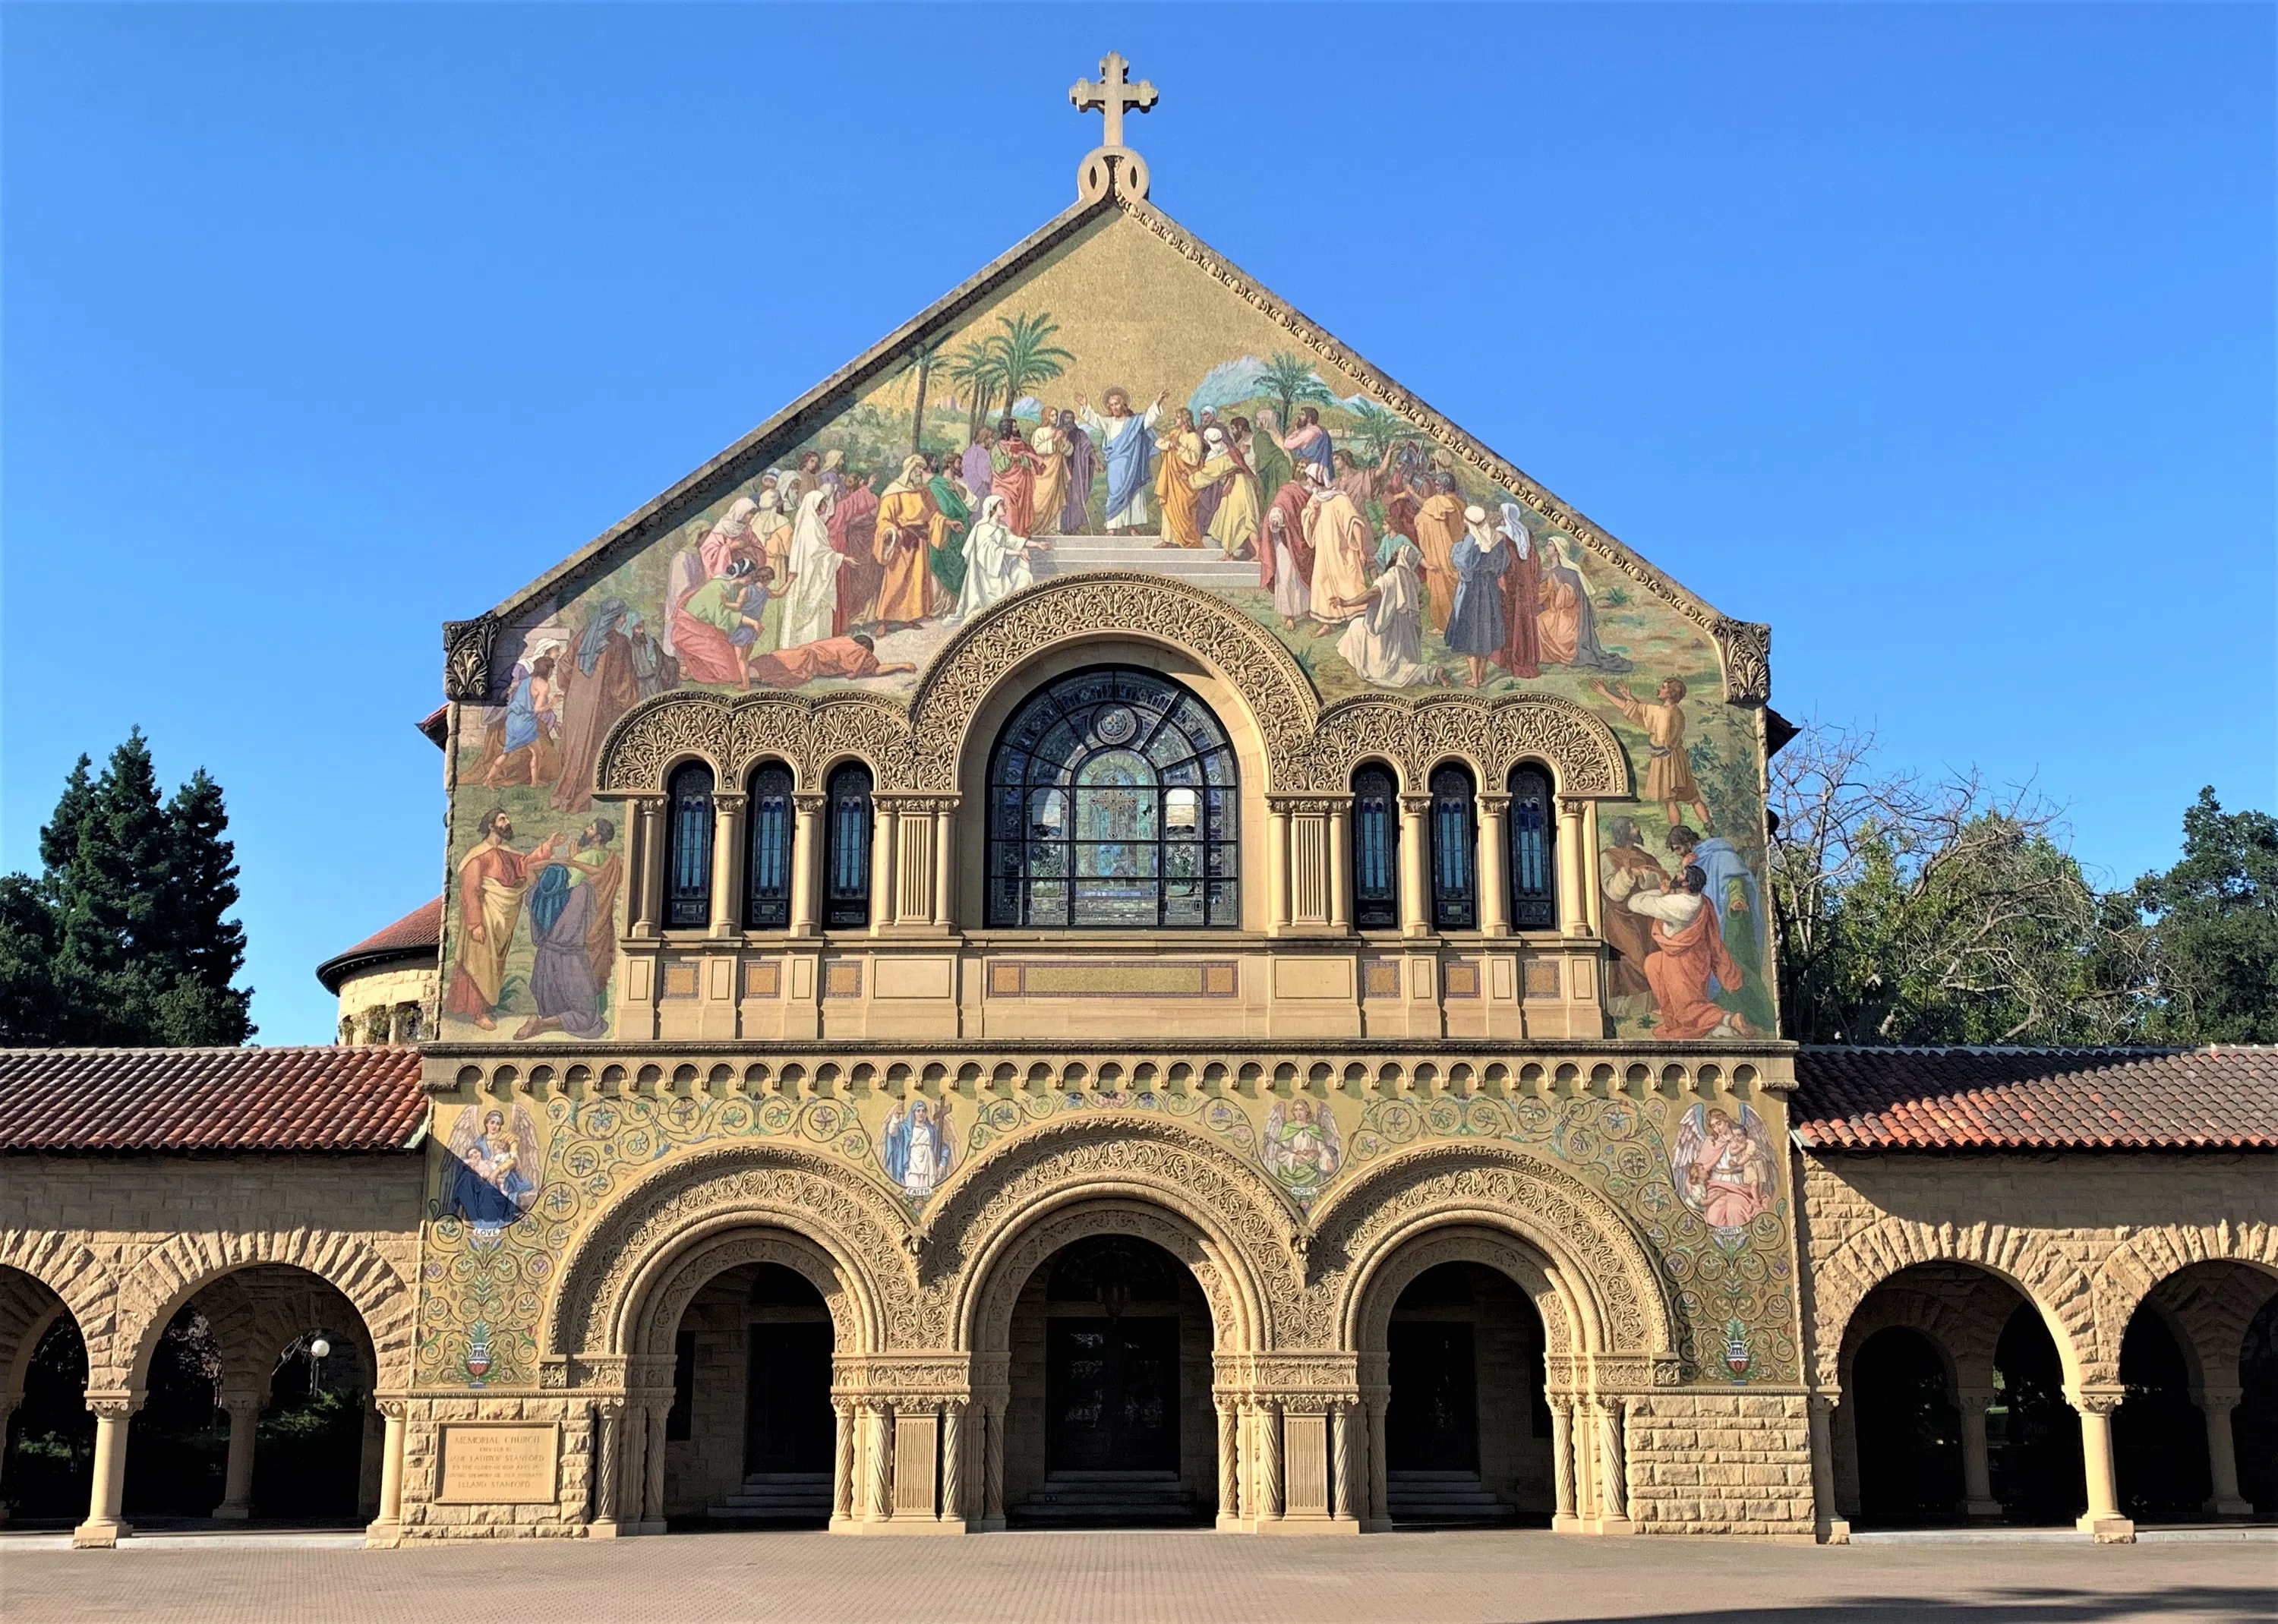 Facade of Memorial Church with arches, large mosaic relief, and intricately carved sandstone.